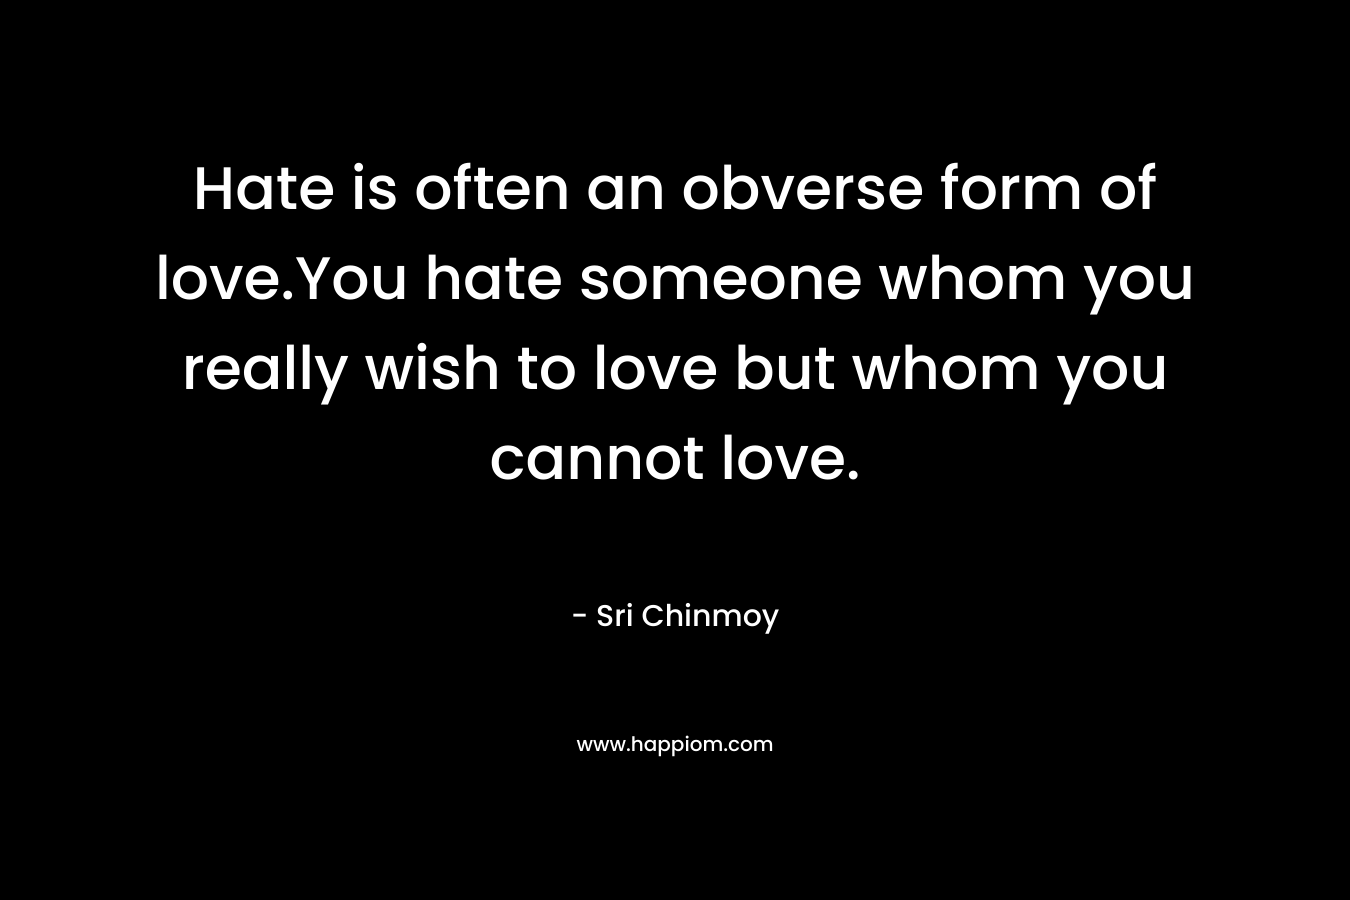 Hate is often an obverse form of love.You hate someone whom you really wish to love but whom you cannot love. – Sri Chinmoy